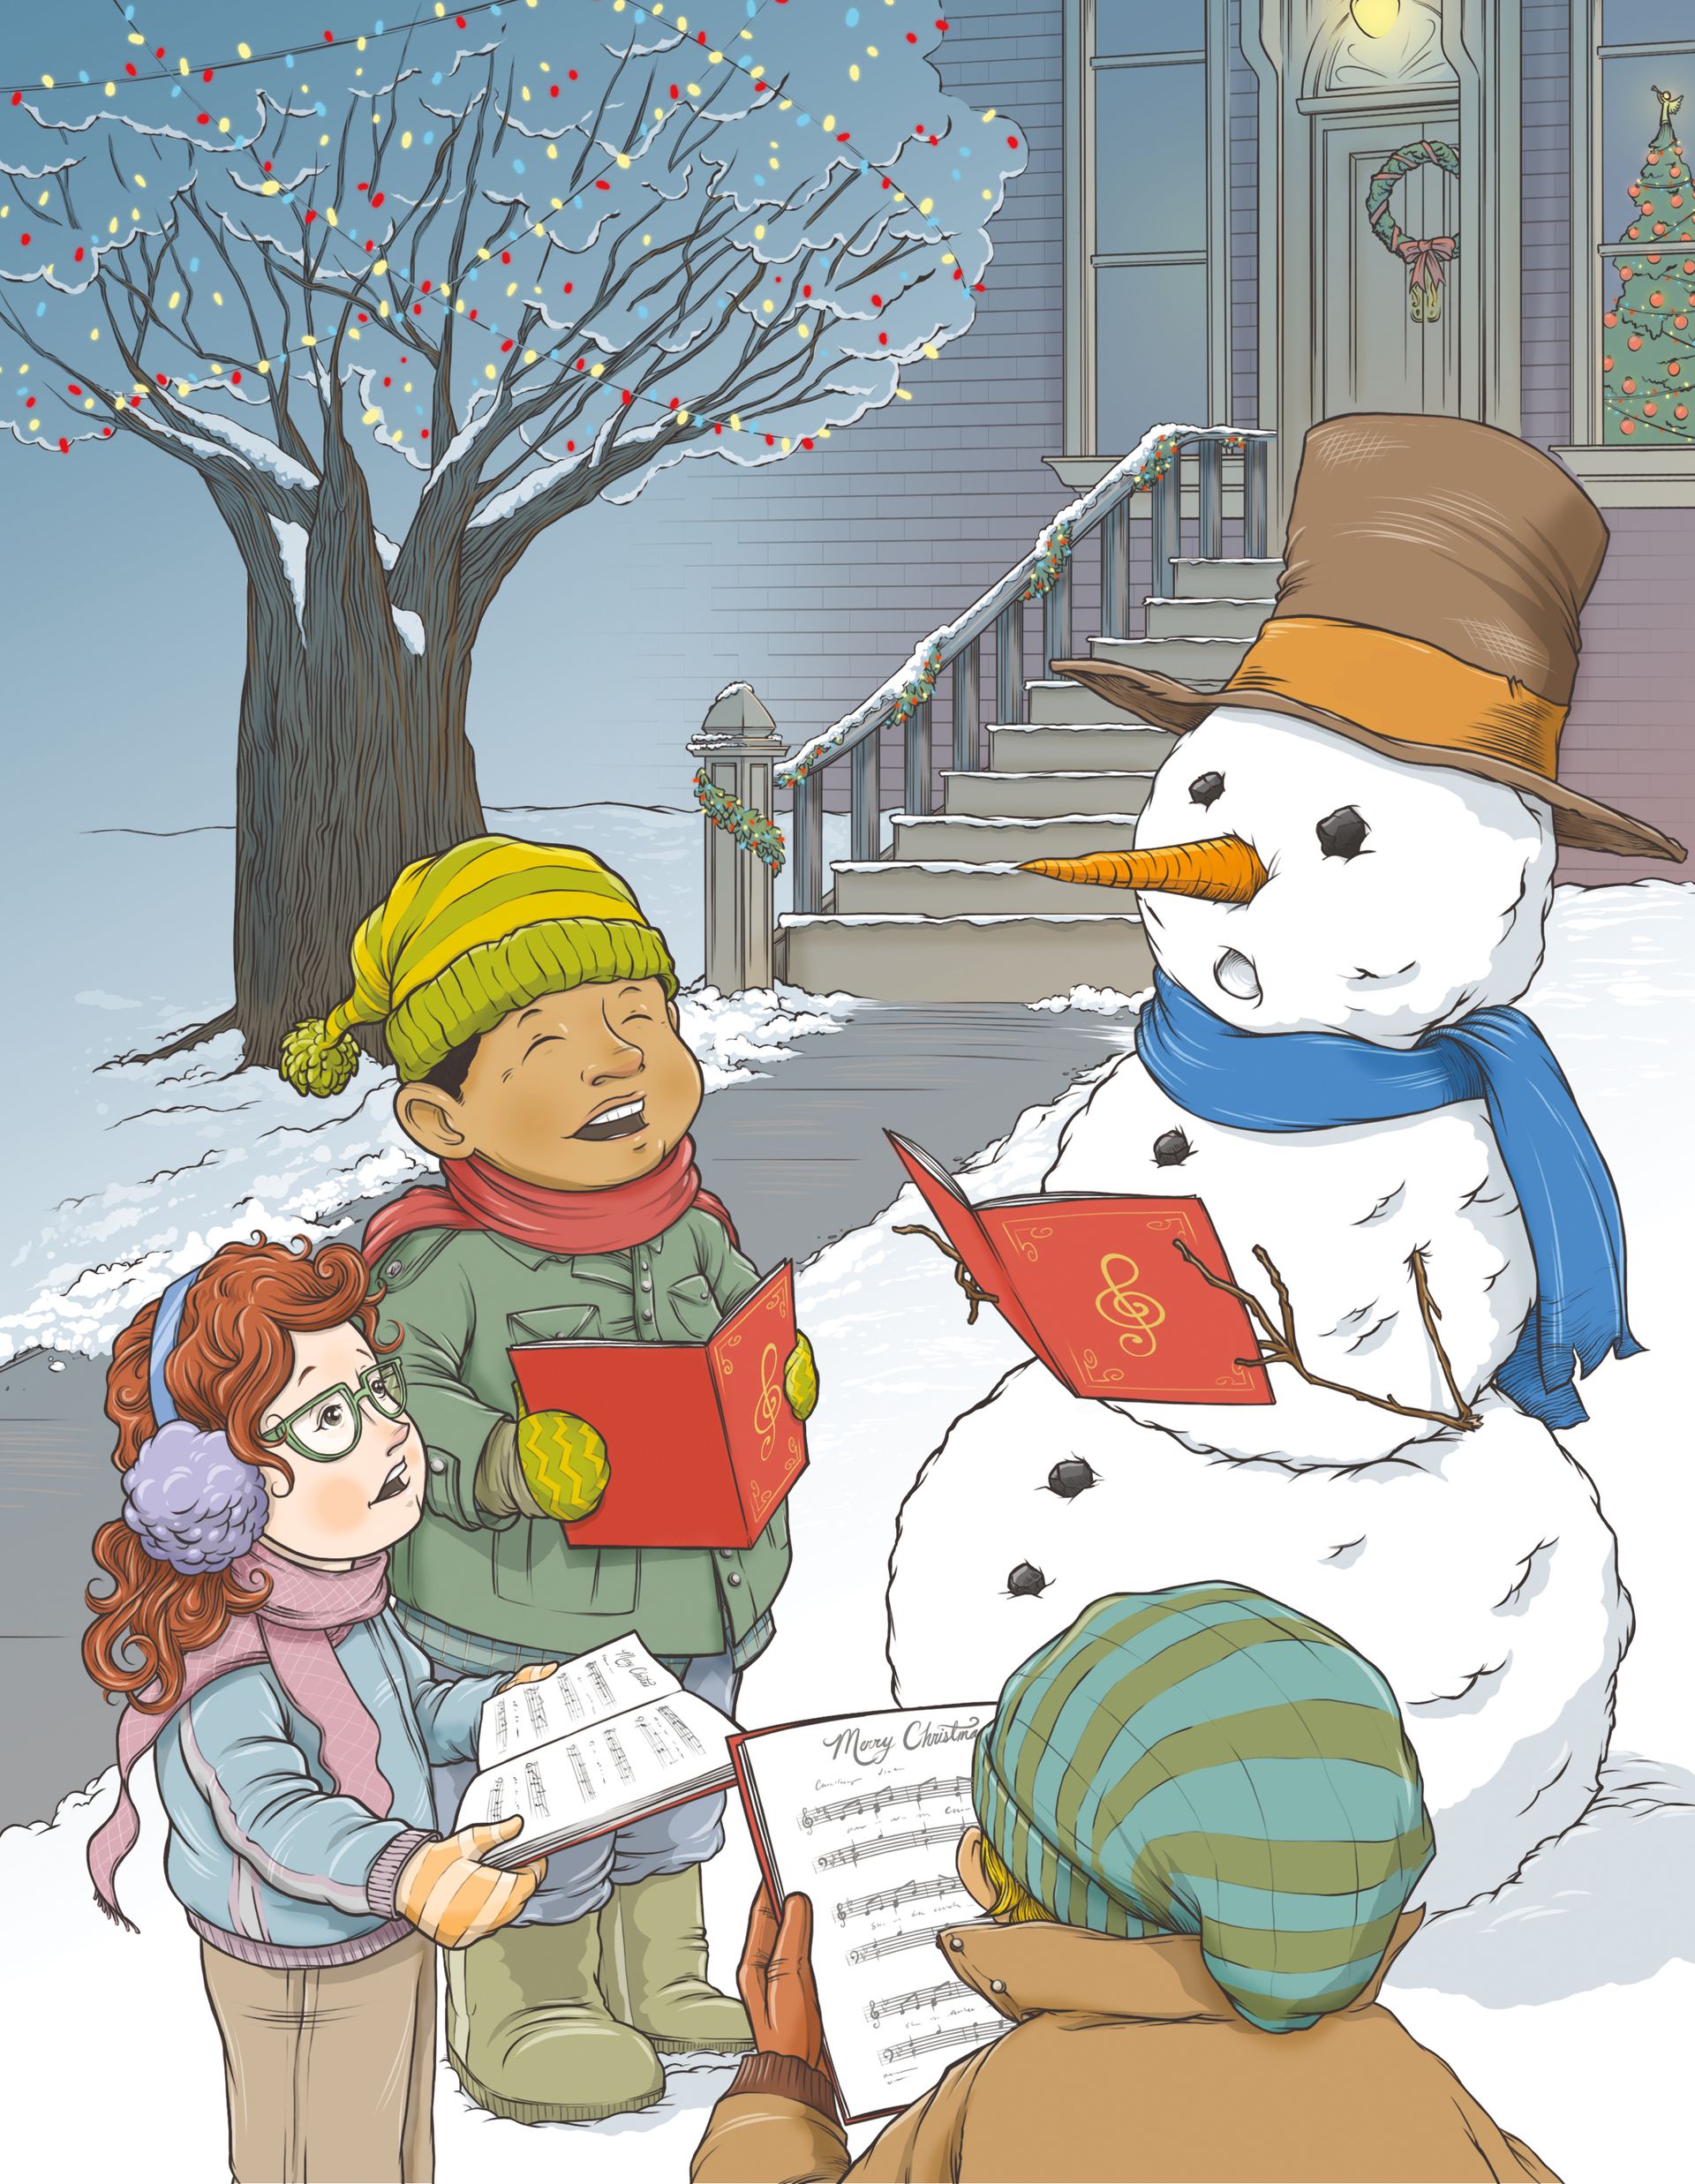 Three children stand with a snowman during Christmastime and sing carols together.